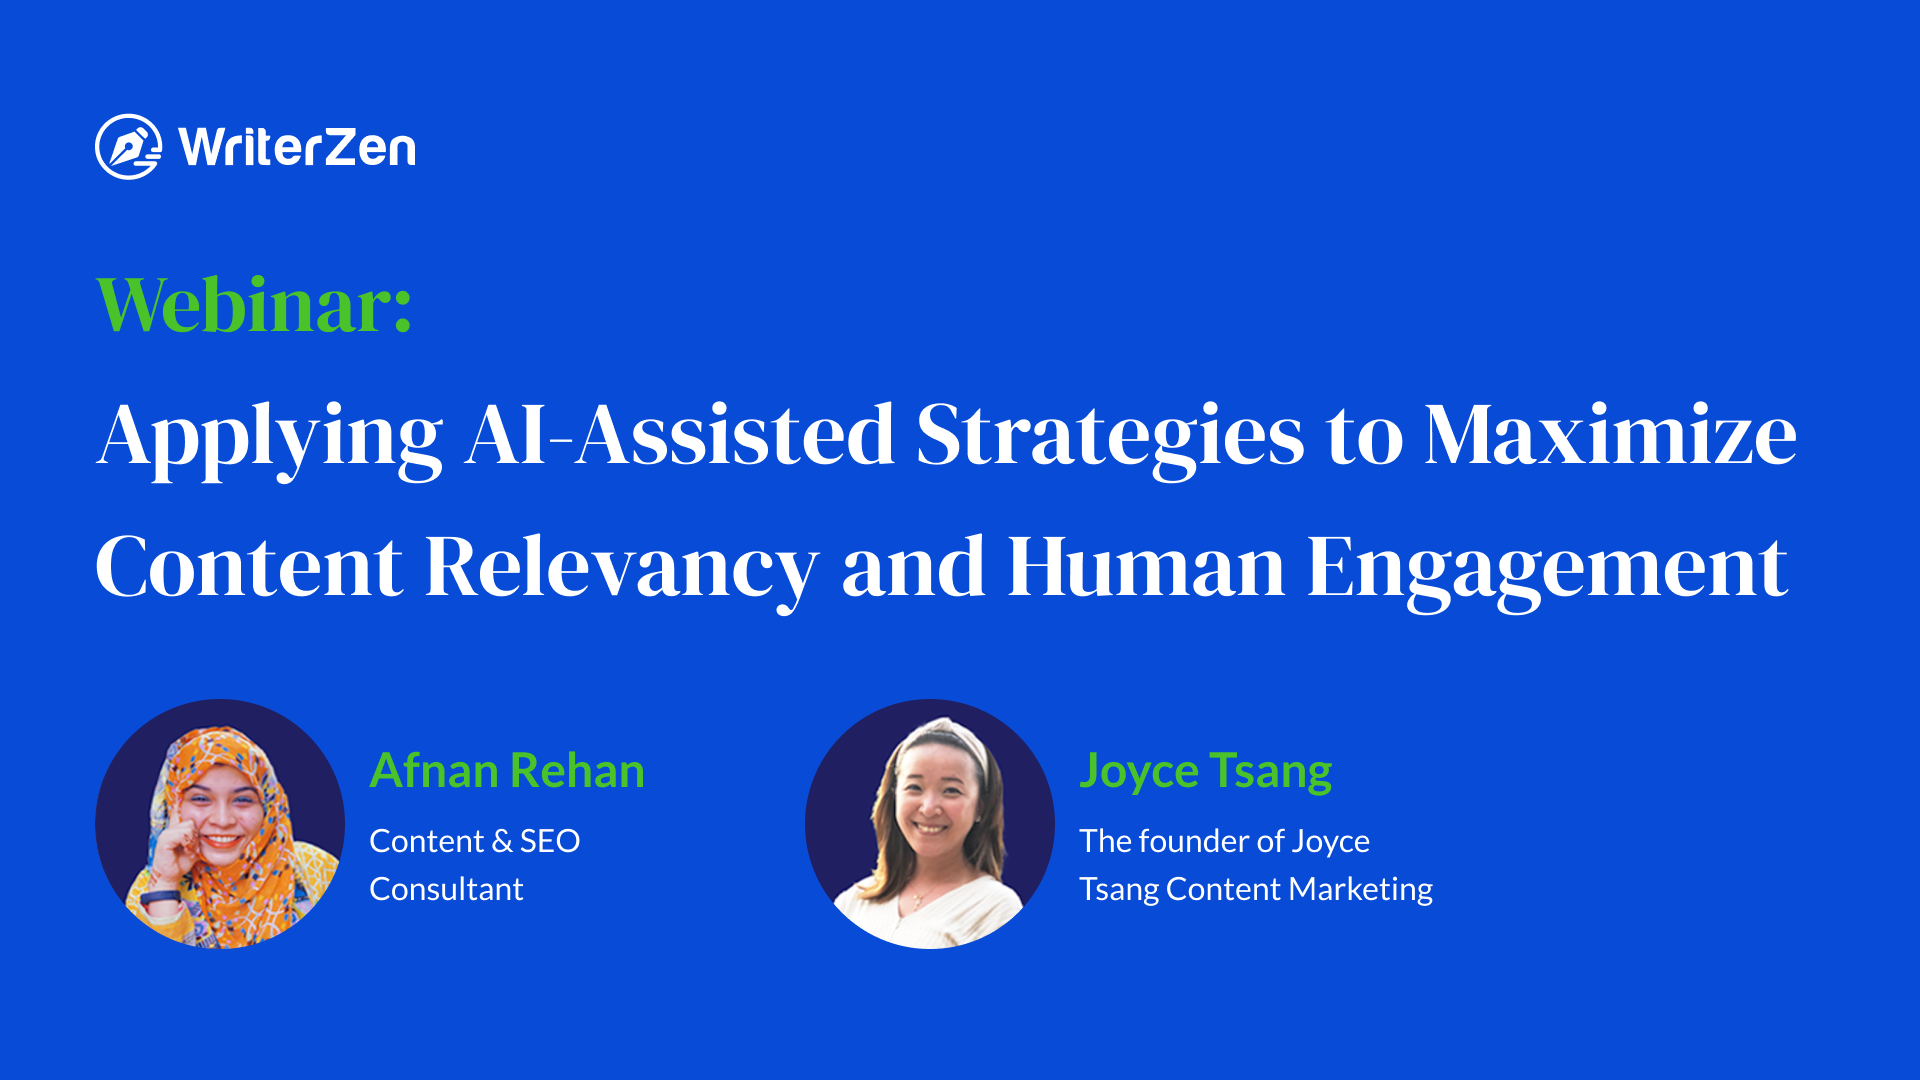 Applying AI-Assisted Strategies to Maximize Content Relevancy and Human Engagement